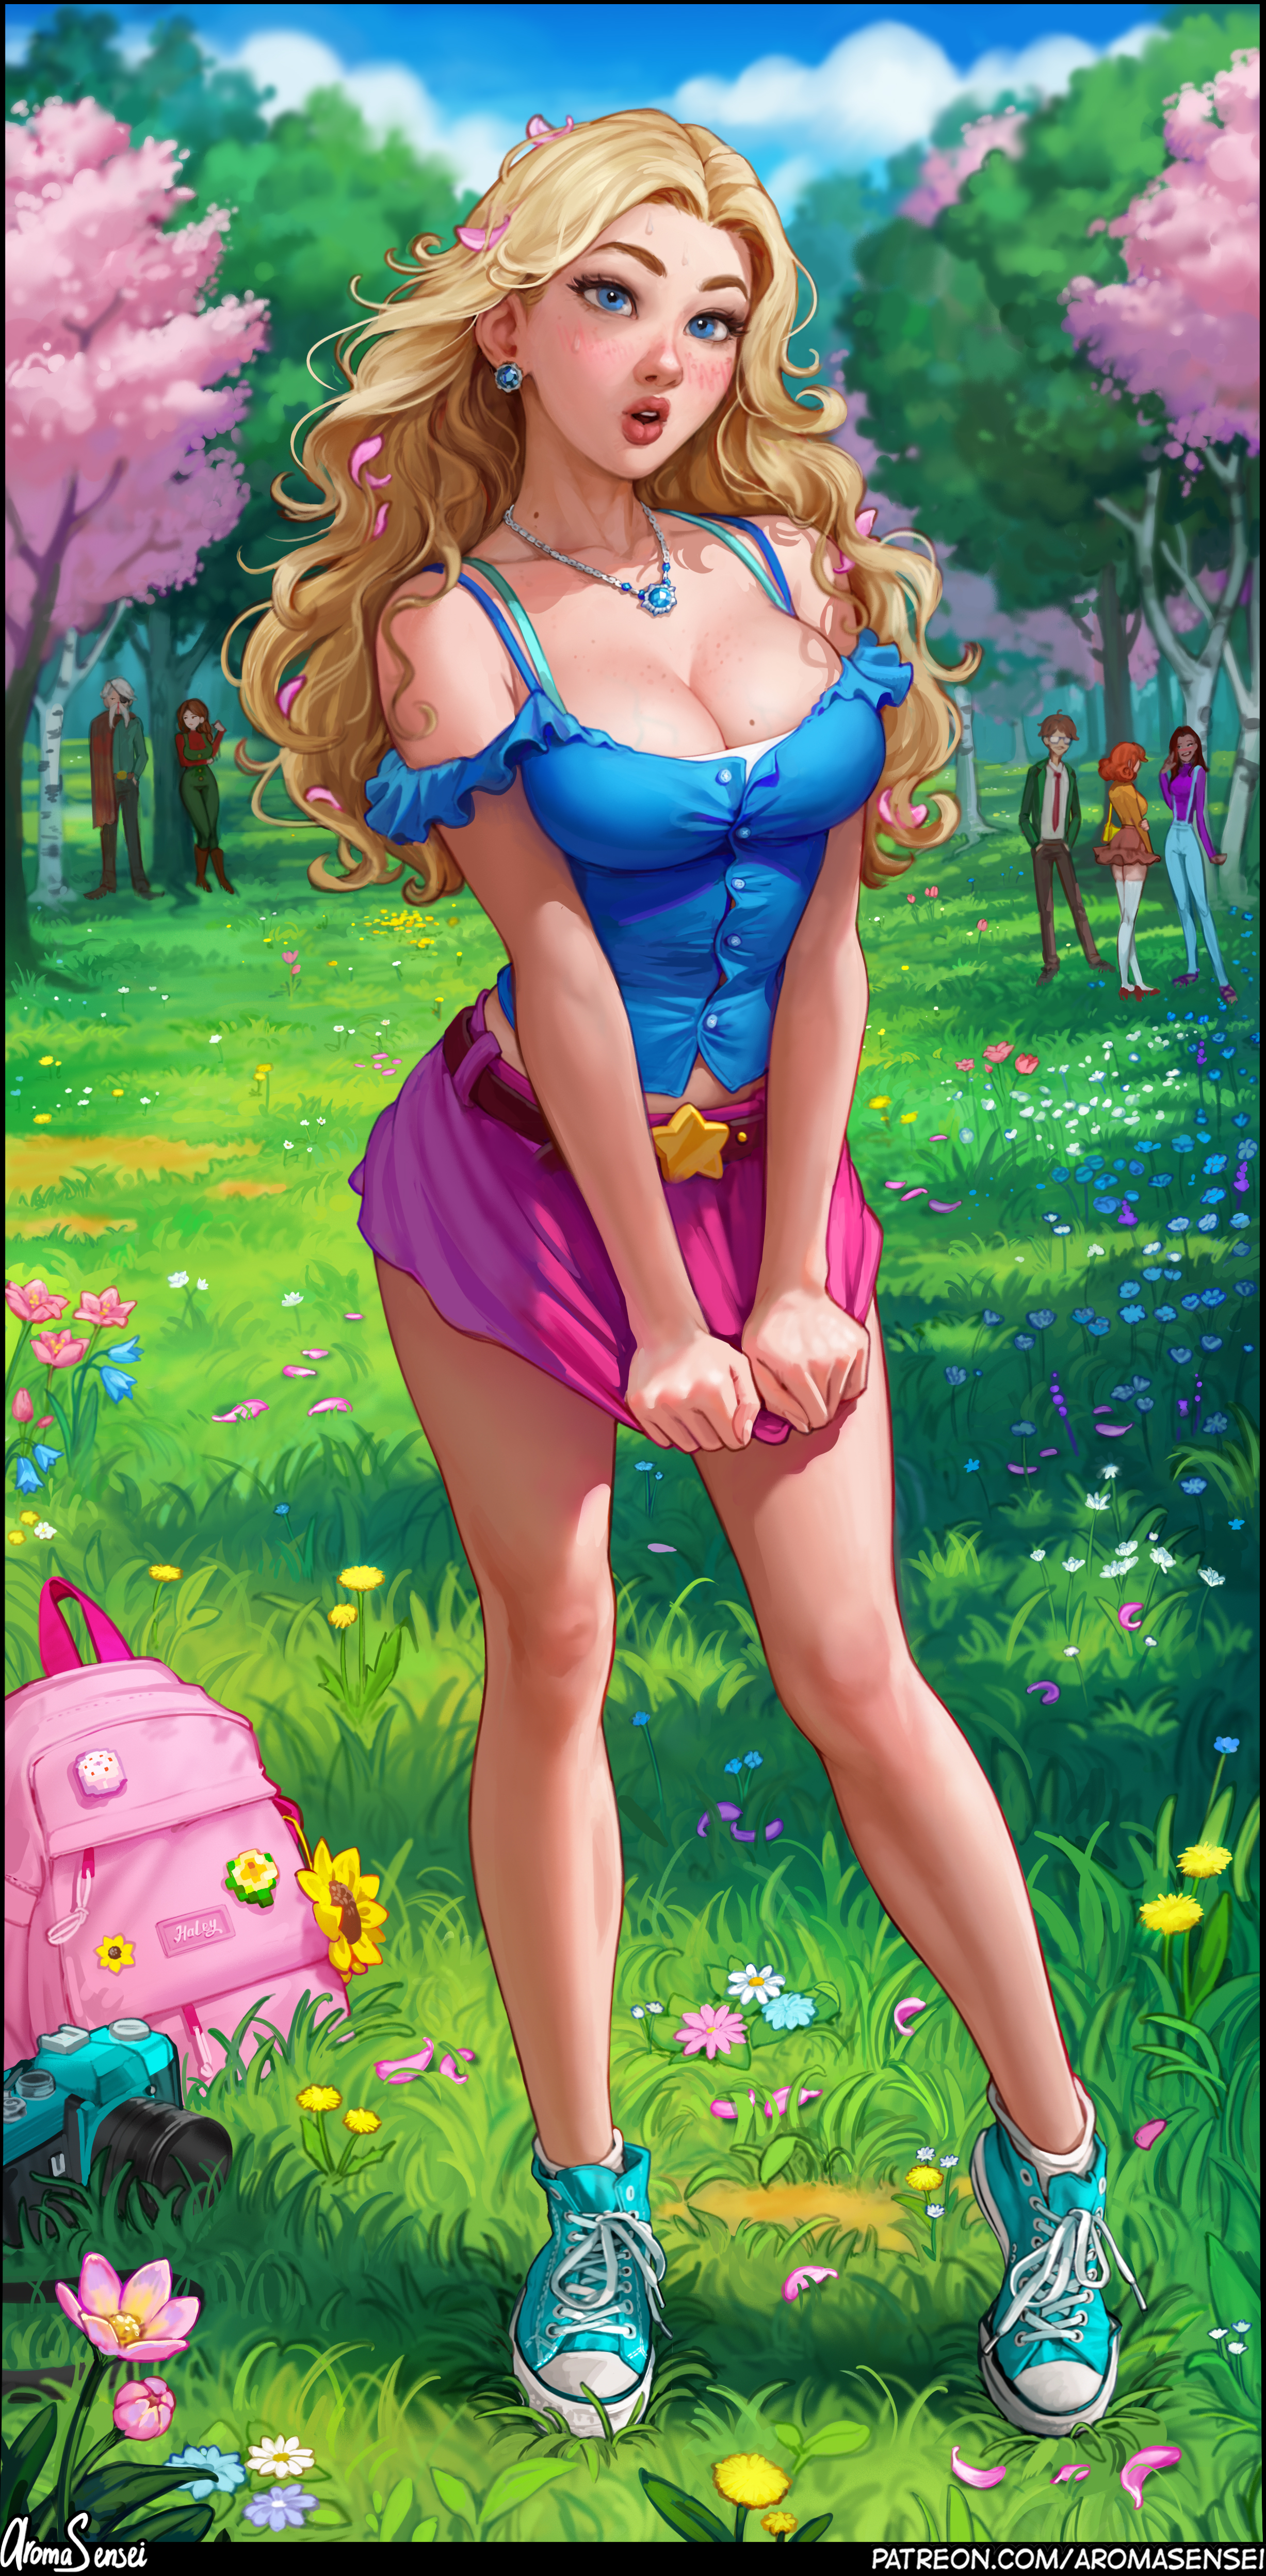 General 2454x4992 Haley (Stardew Valley) video game girls blonde artwork drawing fan art Aroma Sensei blushing cleavage miniskirt blue tops Stardew Valley spring video games outdoors frontal view spread legs long hair open mouth looking at viewer grass sneakers blue eyes watermarked necklace skirt portrait display sunlight digital art